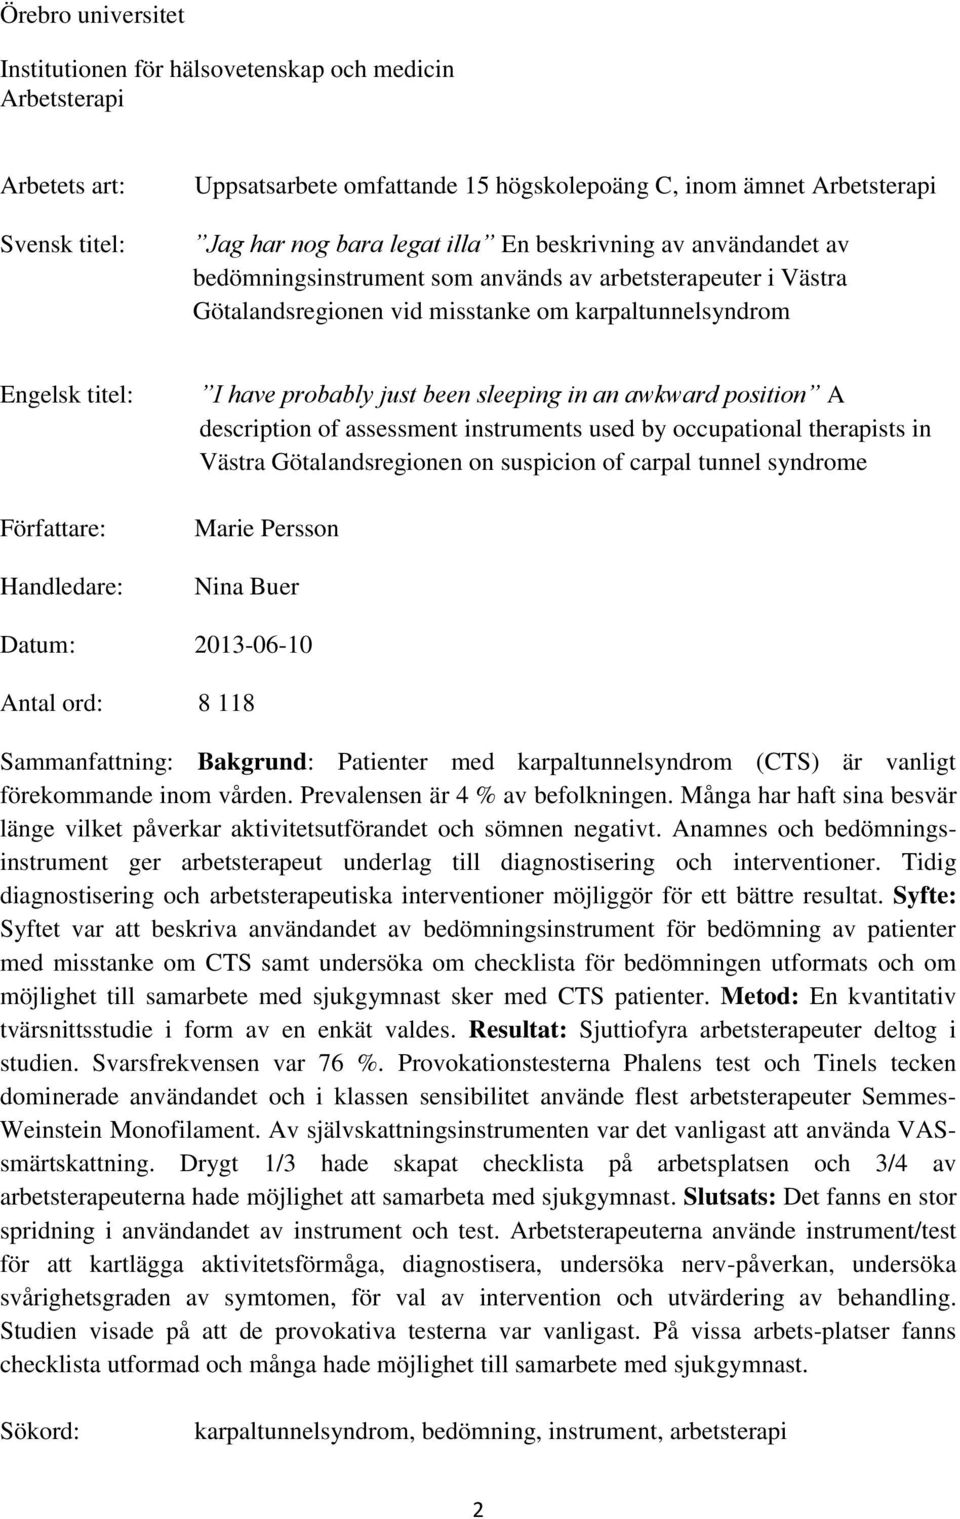 have probably just been sleeping in an awkward position A description of assessment instruments used by occupational therapists in Västra Götalandsregionen on suspicion of carpal tunnel syndrome